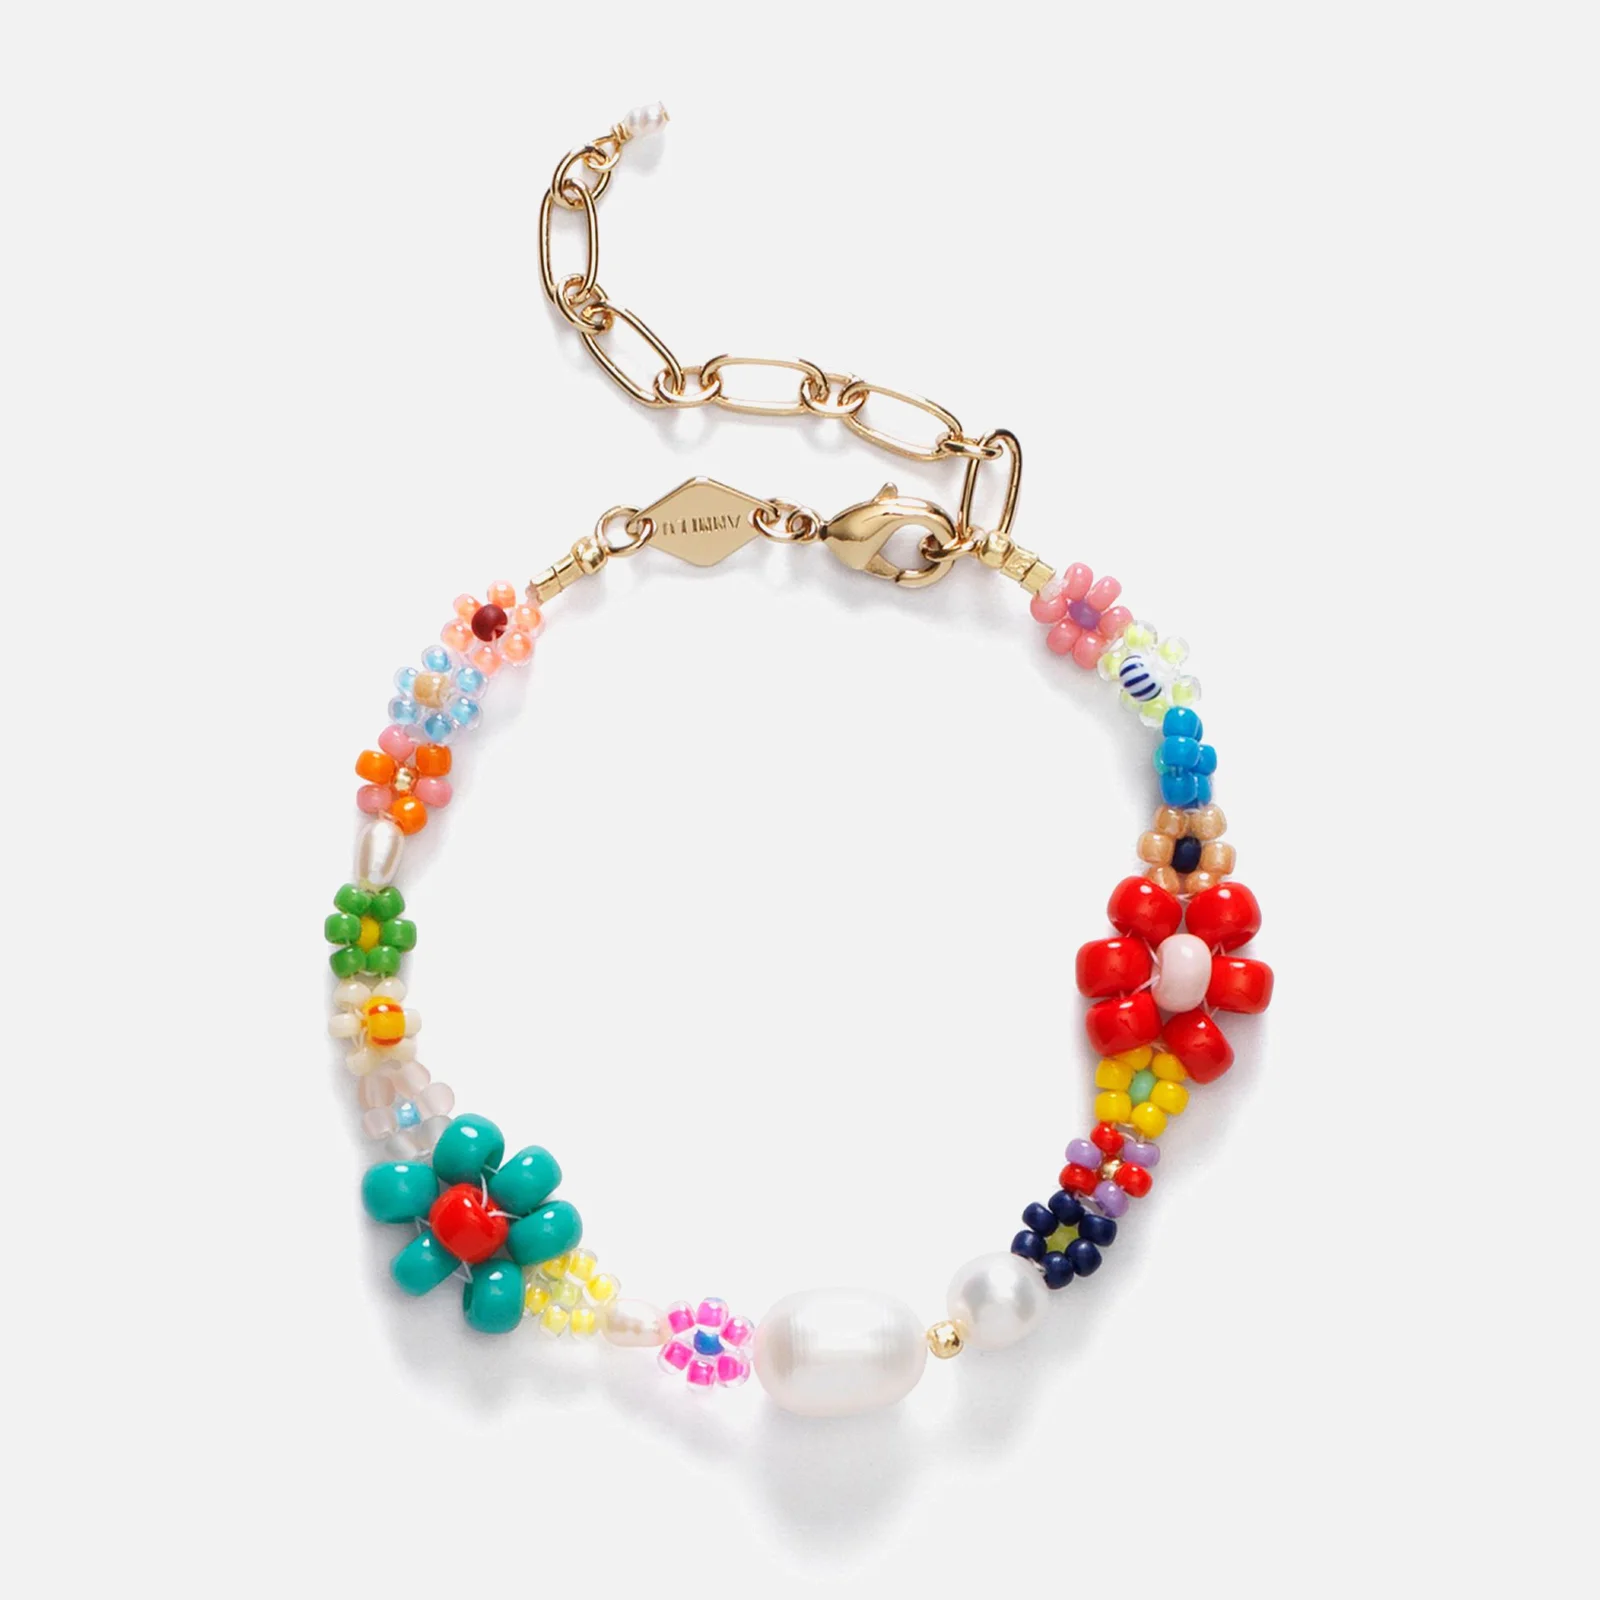 Anni Lu Women's Mexi Flower Pearl and Glass Bead Bracelet Image 1